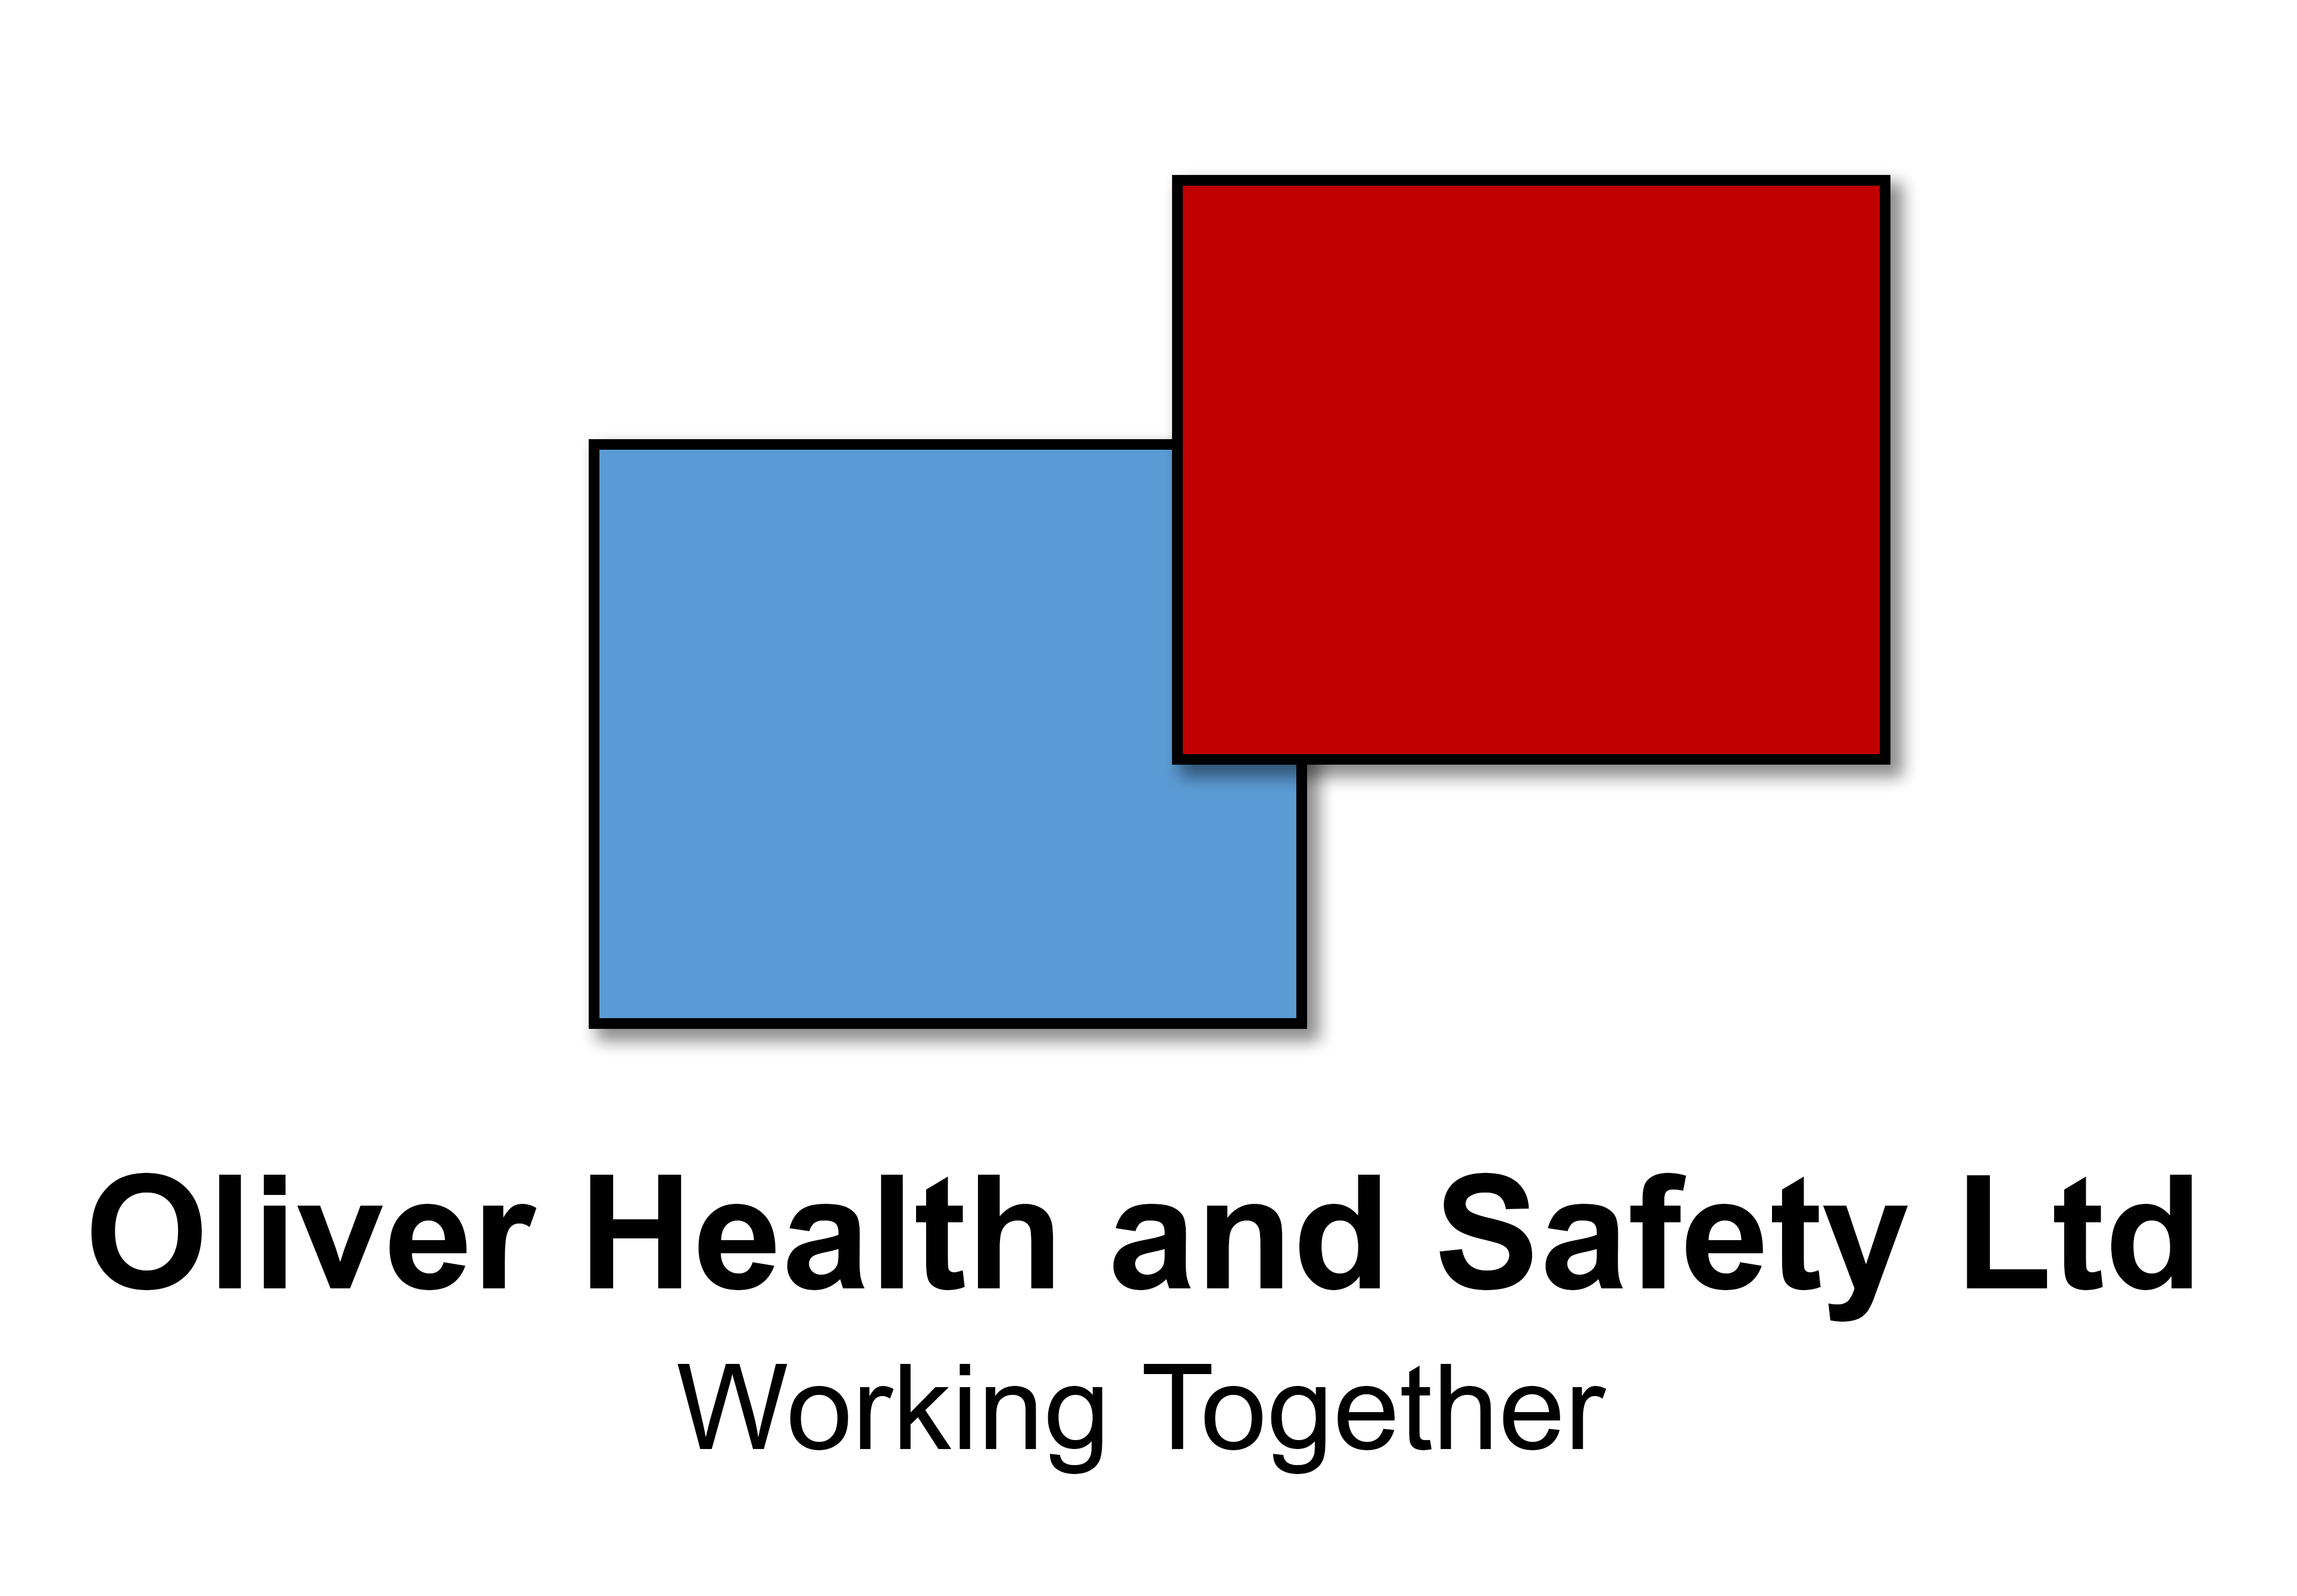 Health and Safety Consultants in Liverpool and the North West